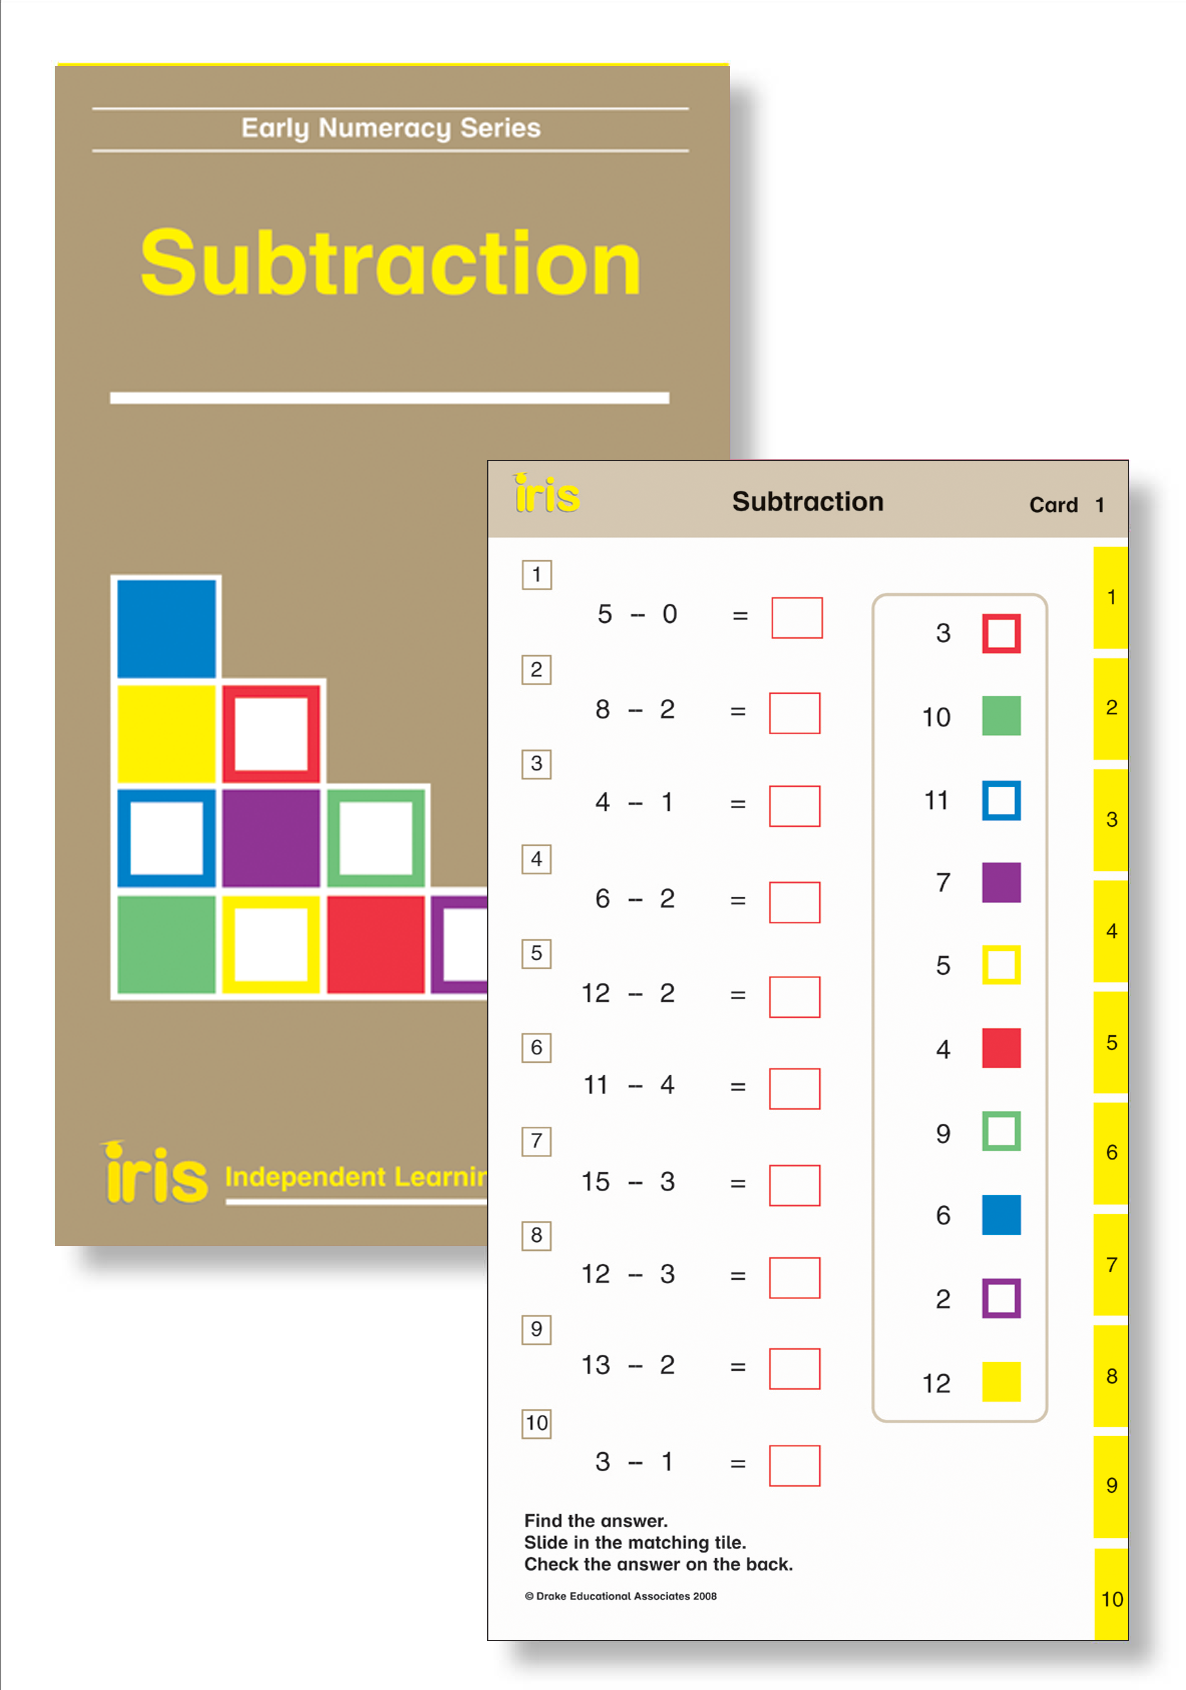 Iris Study Cards: Early Numeracy Year 1 - Subtraction